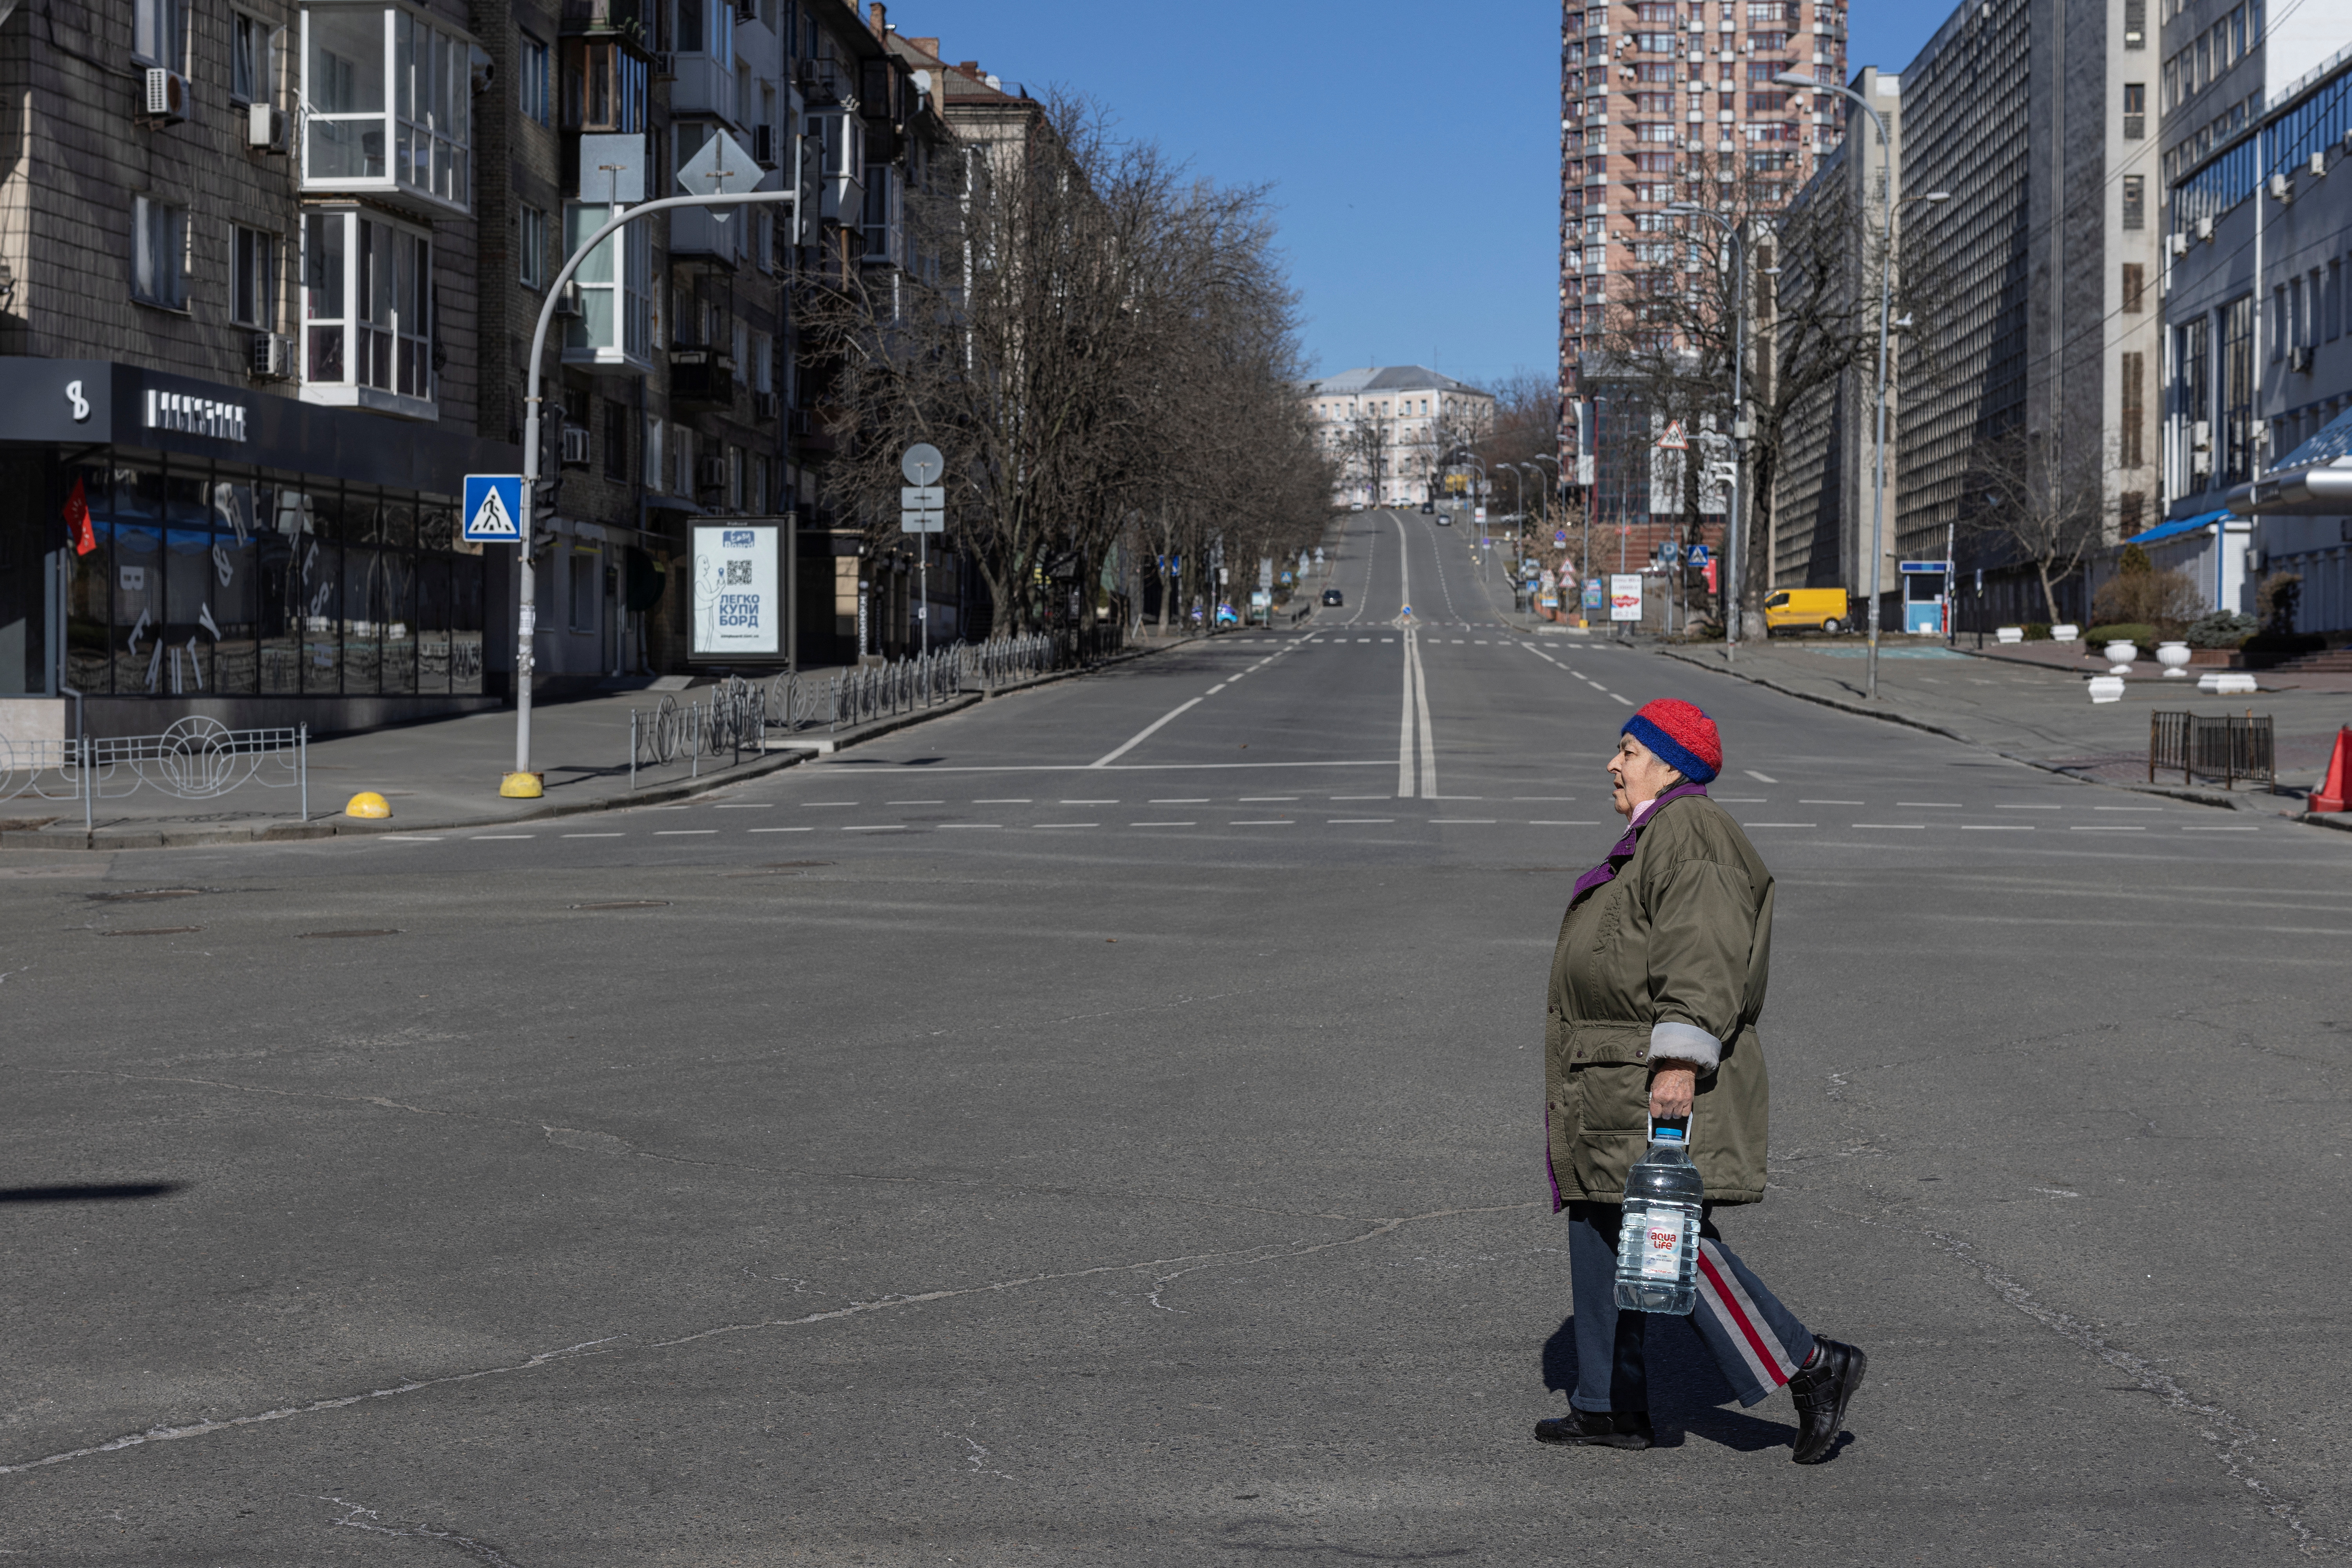 A thirty-five hour curfew in Kyiv